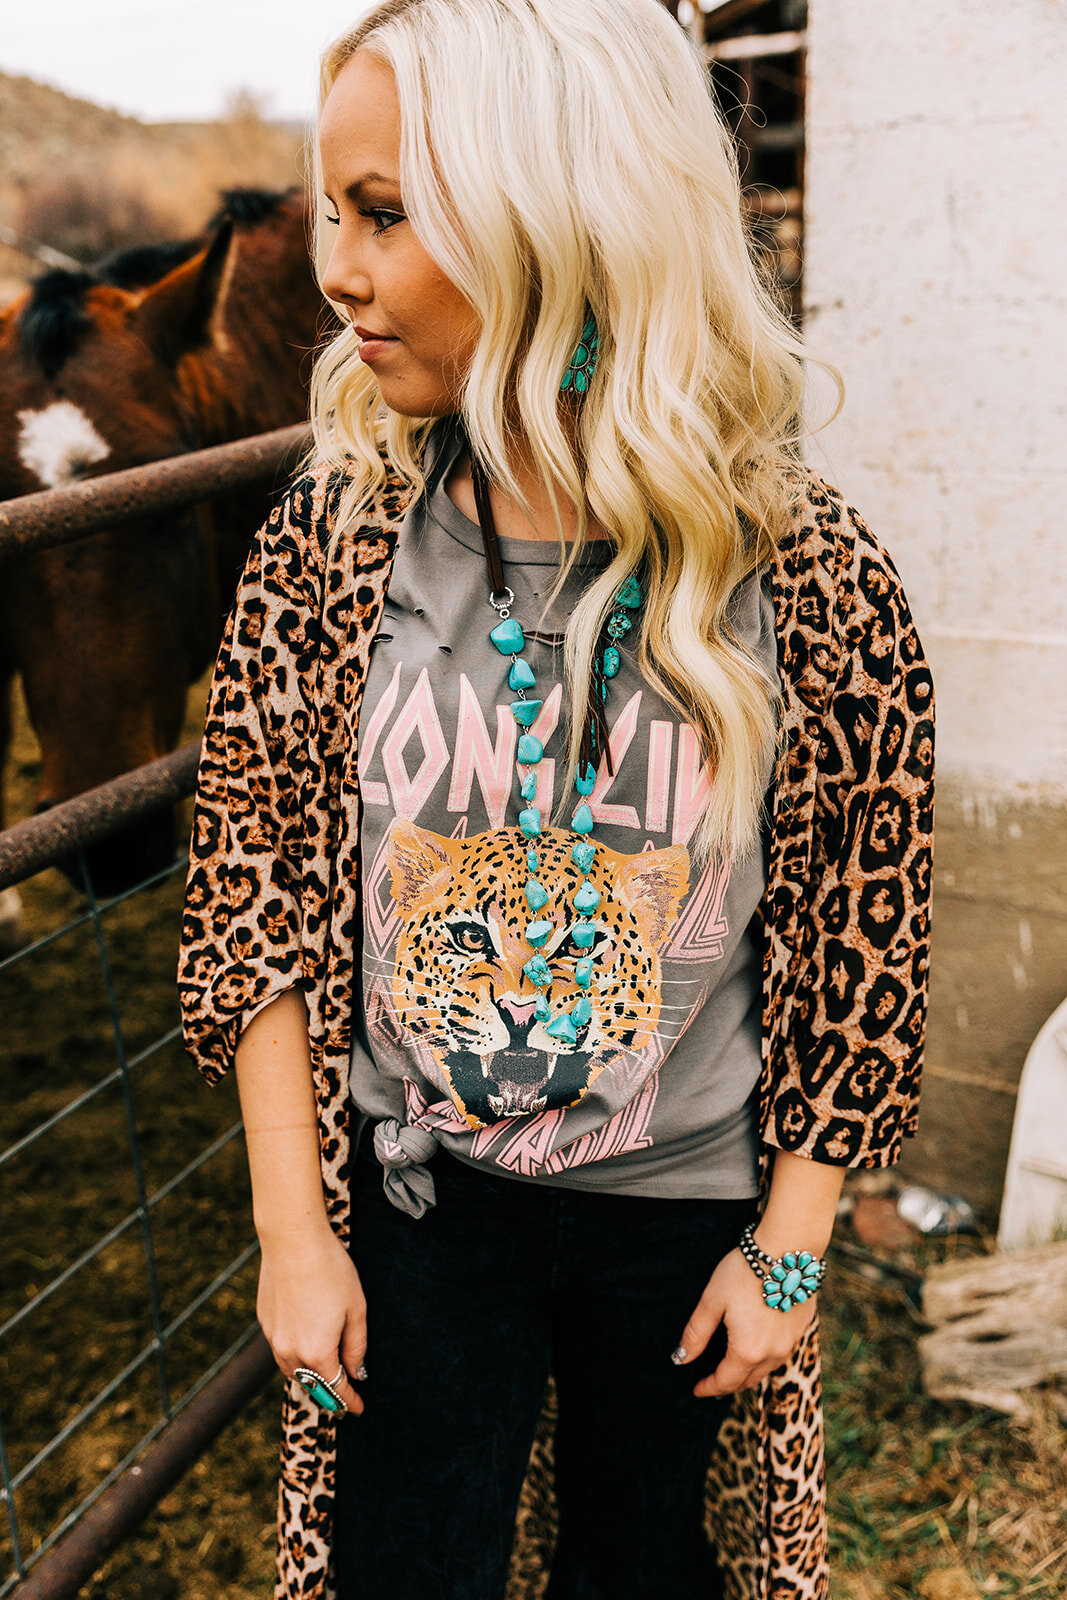  wavy hair teal earrings teal jewelry stone necklace accent jewelry leopard long cardigan duster long hairstyles hair and makeup inspiration country style professional photographers in utah commercial photographers in utah horses wild rag boutique co